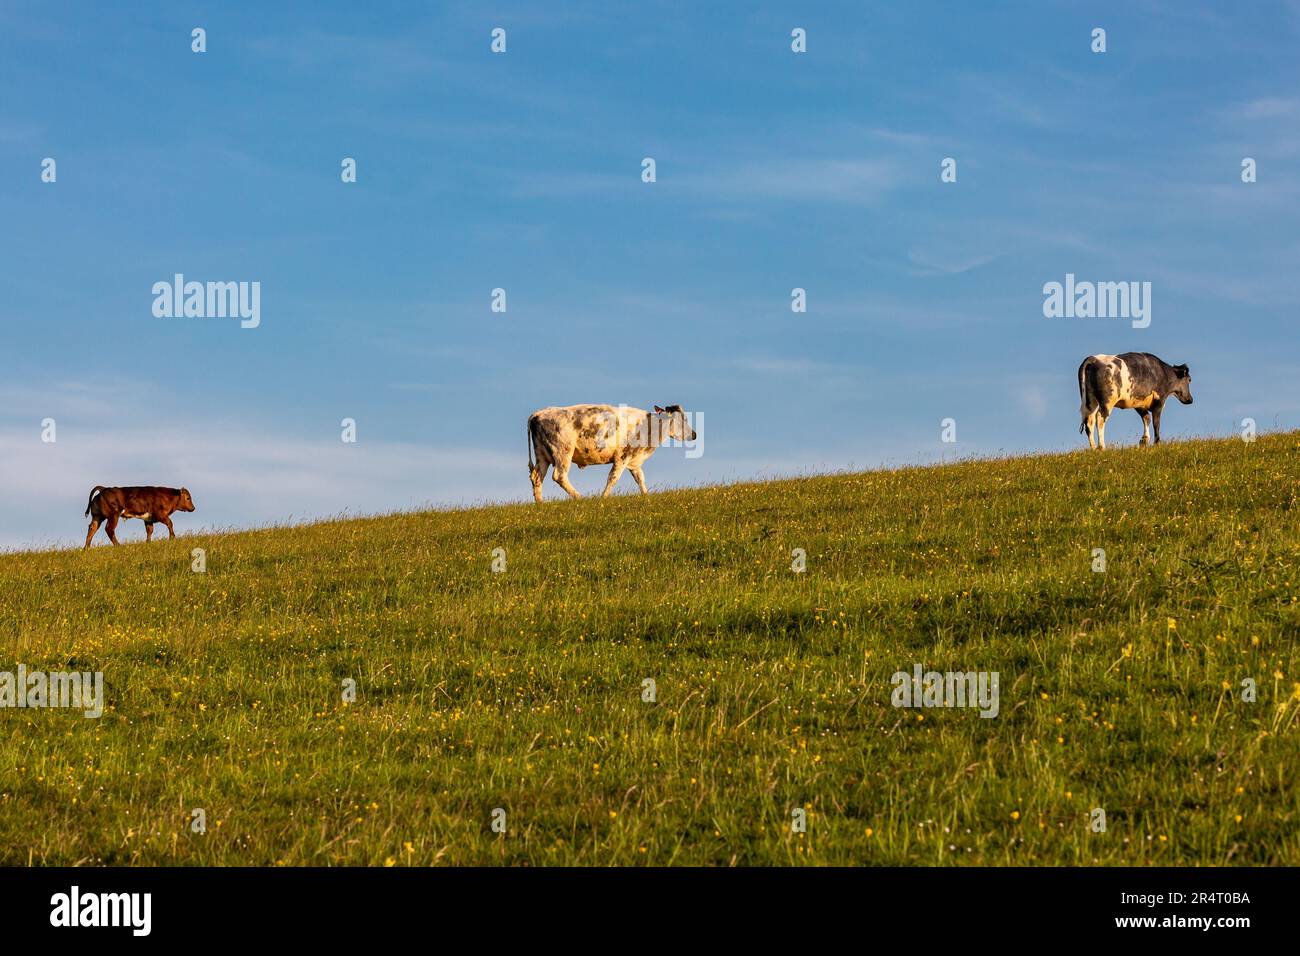 Cows on the horizon with a blue sky behind Stock Photo